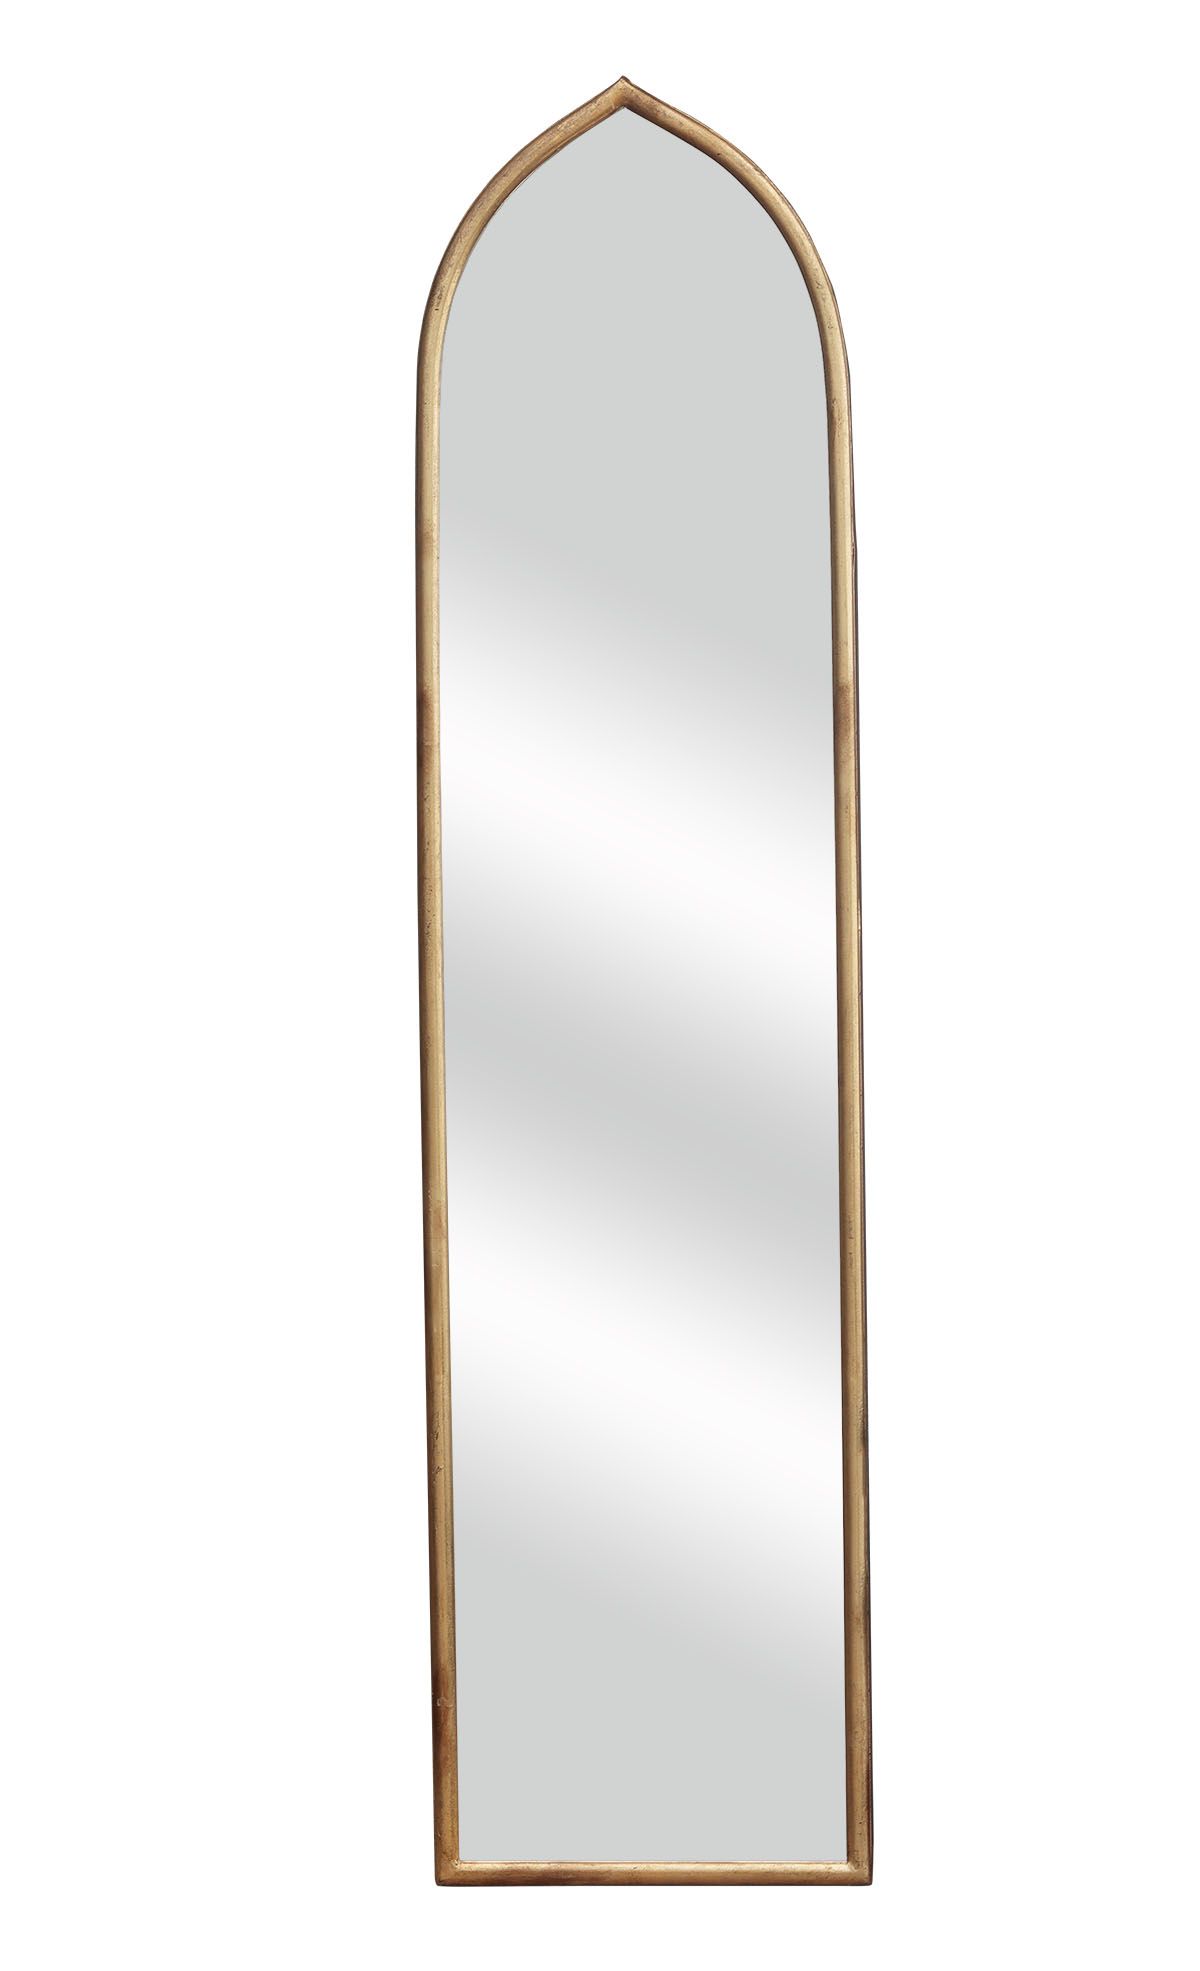 Vintage Full Length Wall Mirror With Arched Metal Frame, Simple Full With Regard To Most Up To Date Mirror Framed Bathroom Wall Mirrors (View 12 of 15)